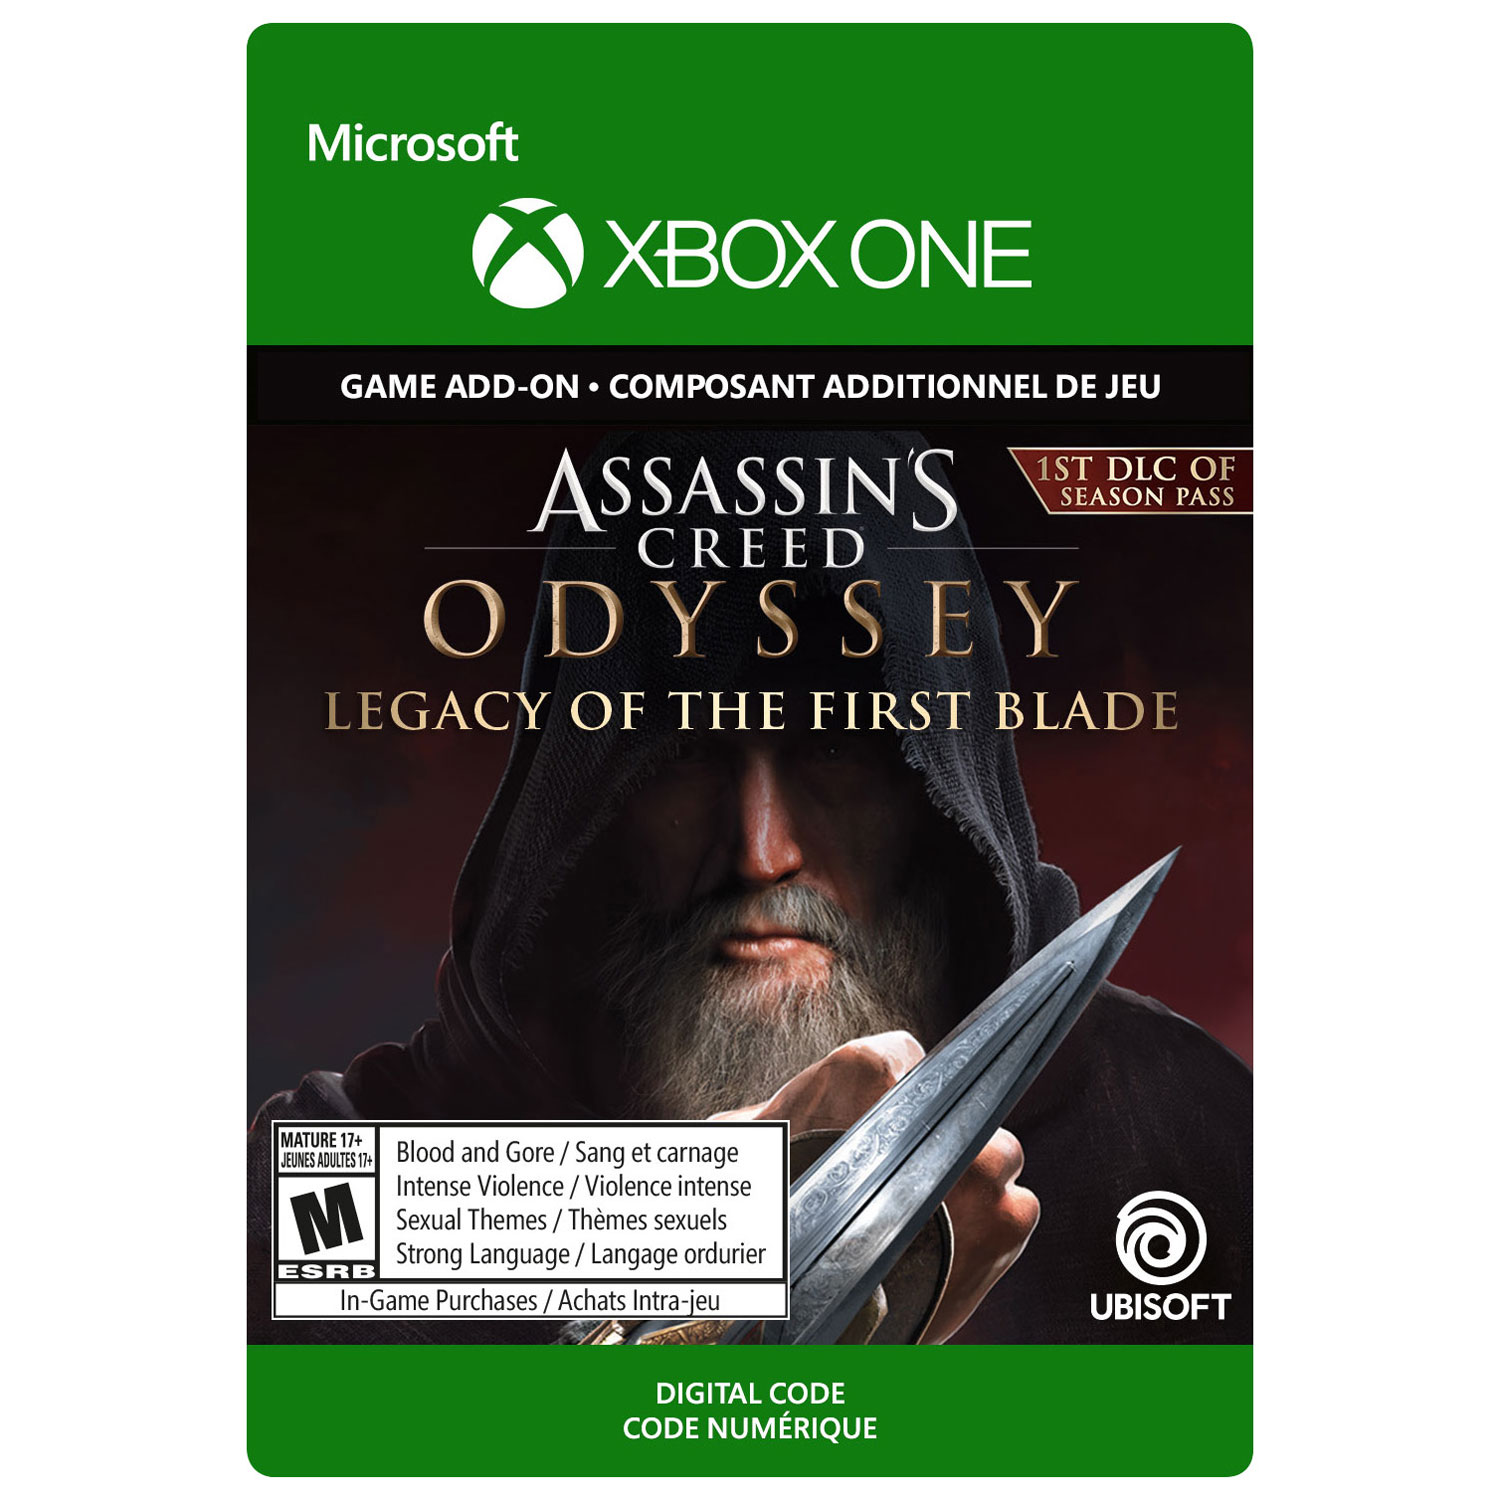 Assassin's Creed Odyssey: Legacy of the First Blade (Xbox One) - Digital Download